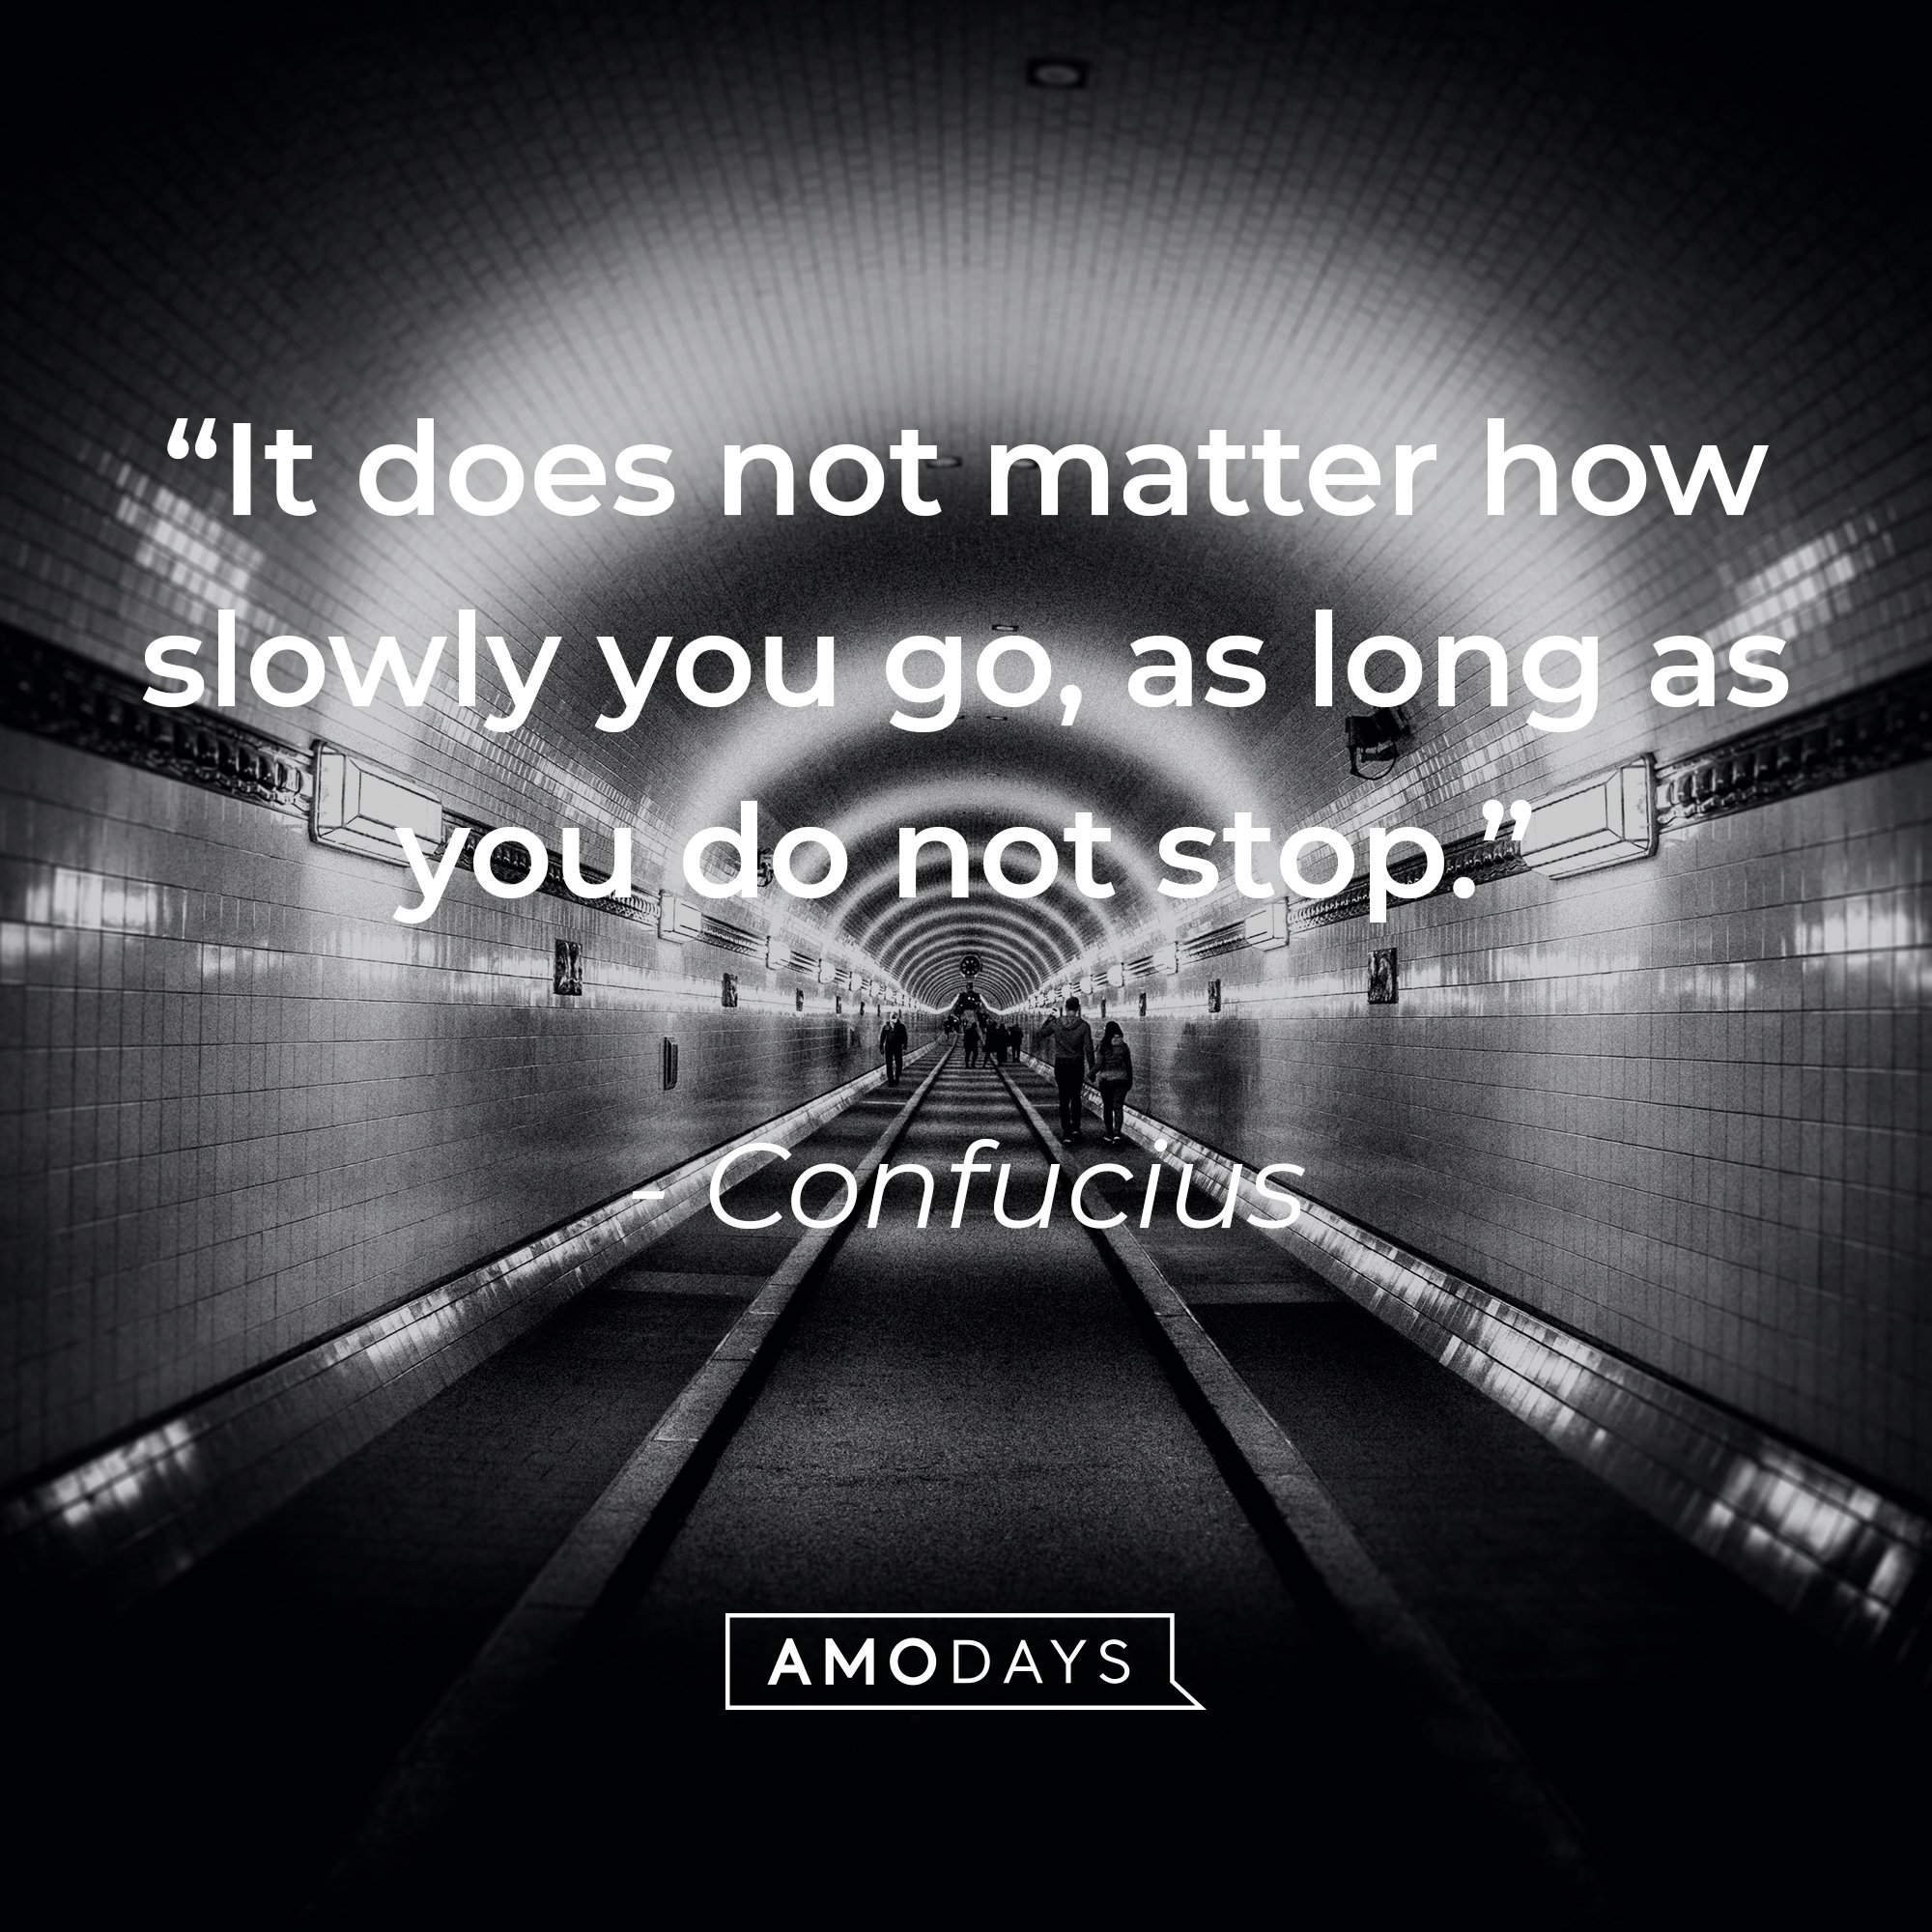 Confucious’ quote:“It does not matter how slowly you go, as long as you do not stop.” | Image: Amodays  